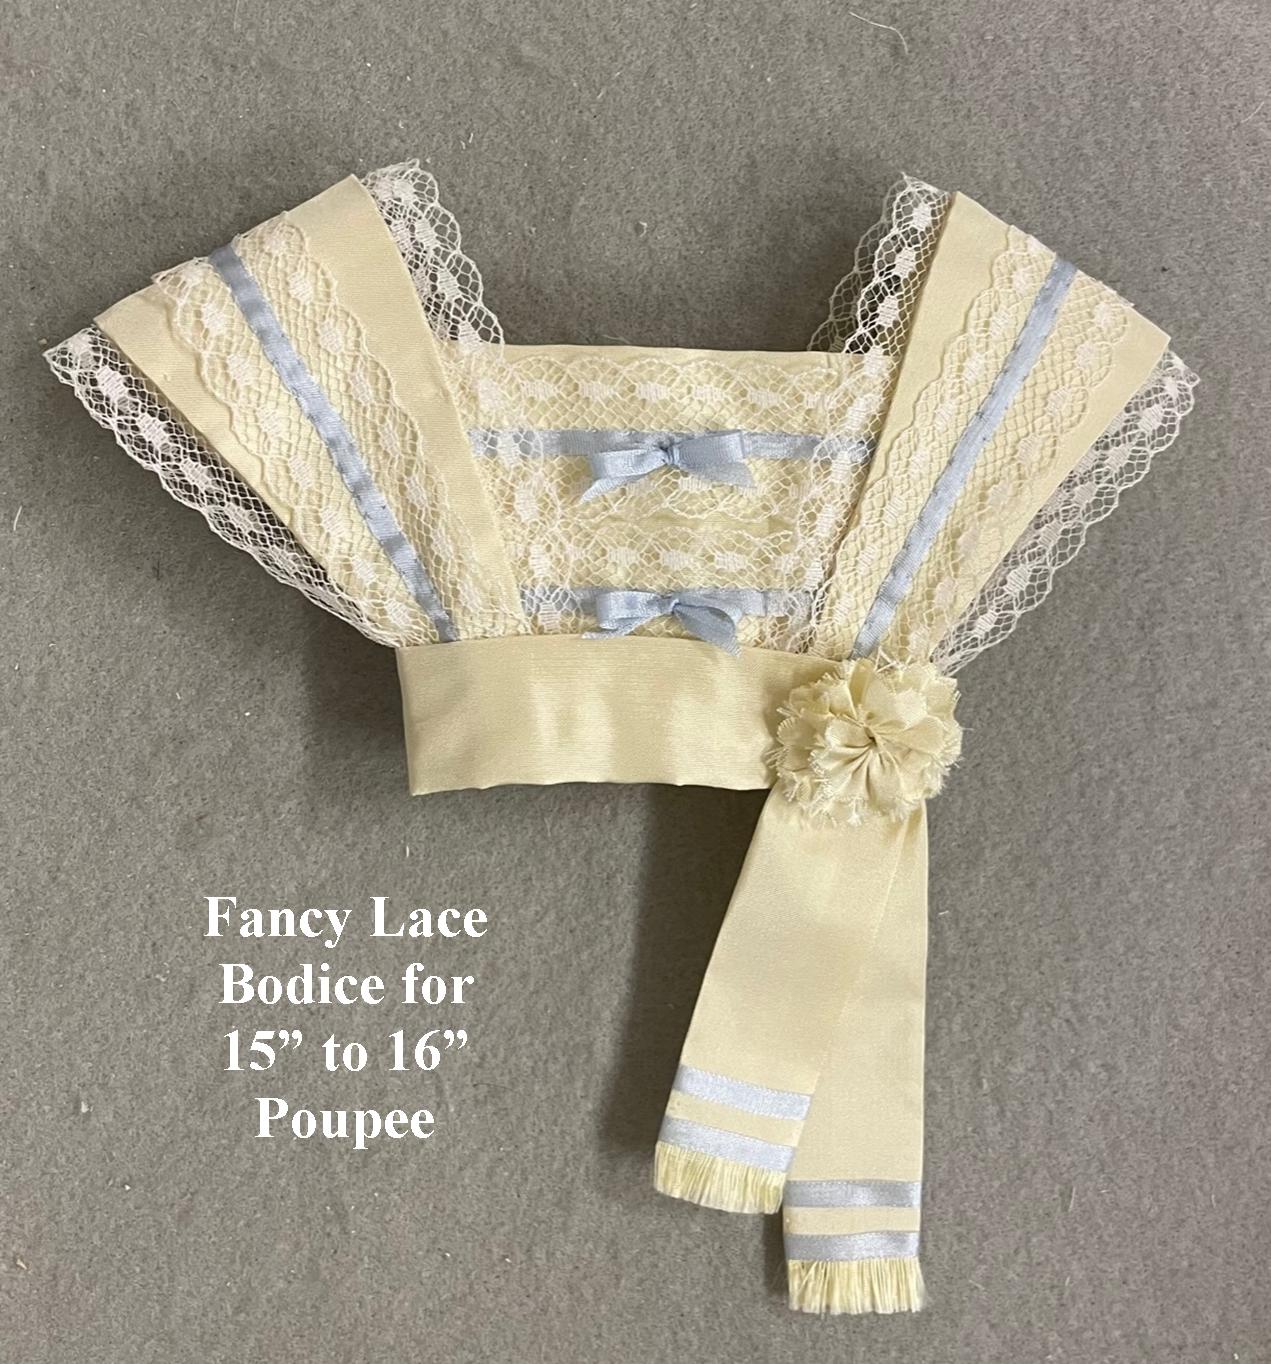 Fancy Lace Bodice for 15" to 16" Poupee